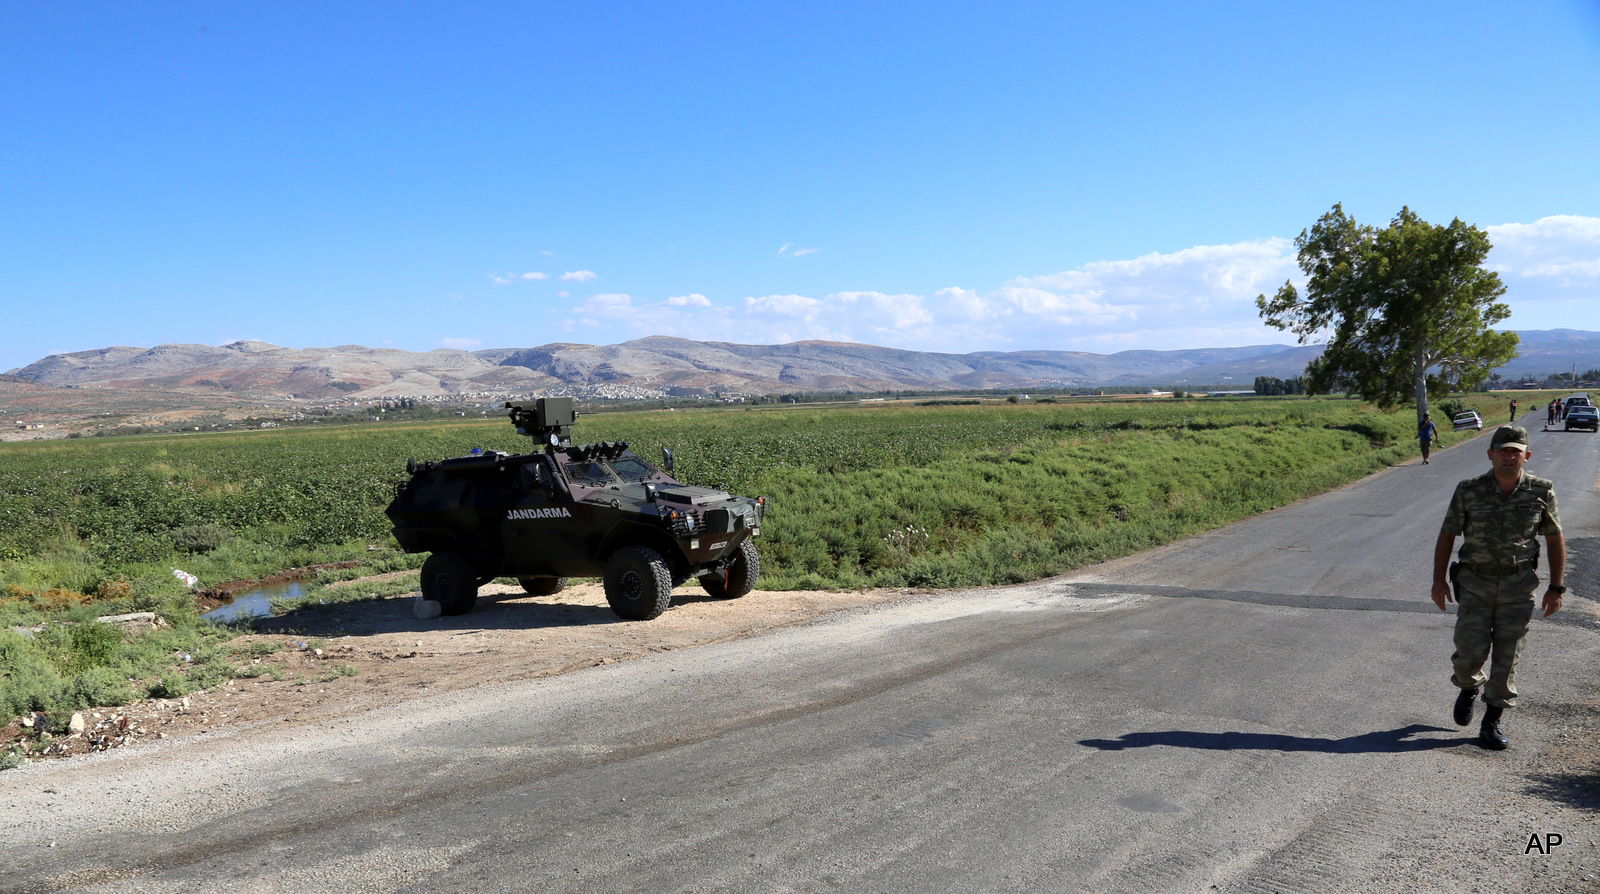 Turkish soldiers patrol a road near Hacipasa, Hatay, Turkey. At the peak of Turkey’s oil smuggling boom, the main transit point was a dusty hamlet called Hacipasa on the Orontes River that marks the border with Syria, Saturday, Sept. 20, 2014. Hacipasa has been a smuggling haven for decades, authorities and residents say. The fuel had come from oil wells in Iraq or Syria controlled by militants, including the Islamic State group, and was sold to middle men who smuggled it across the Turkish-Syrian border.